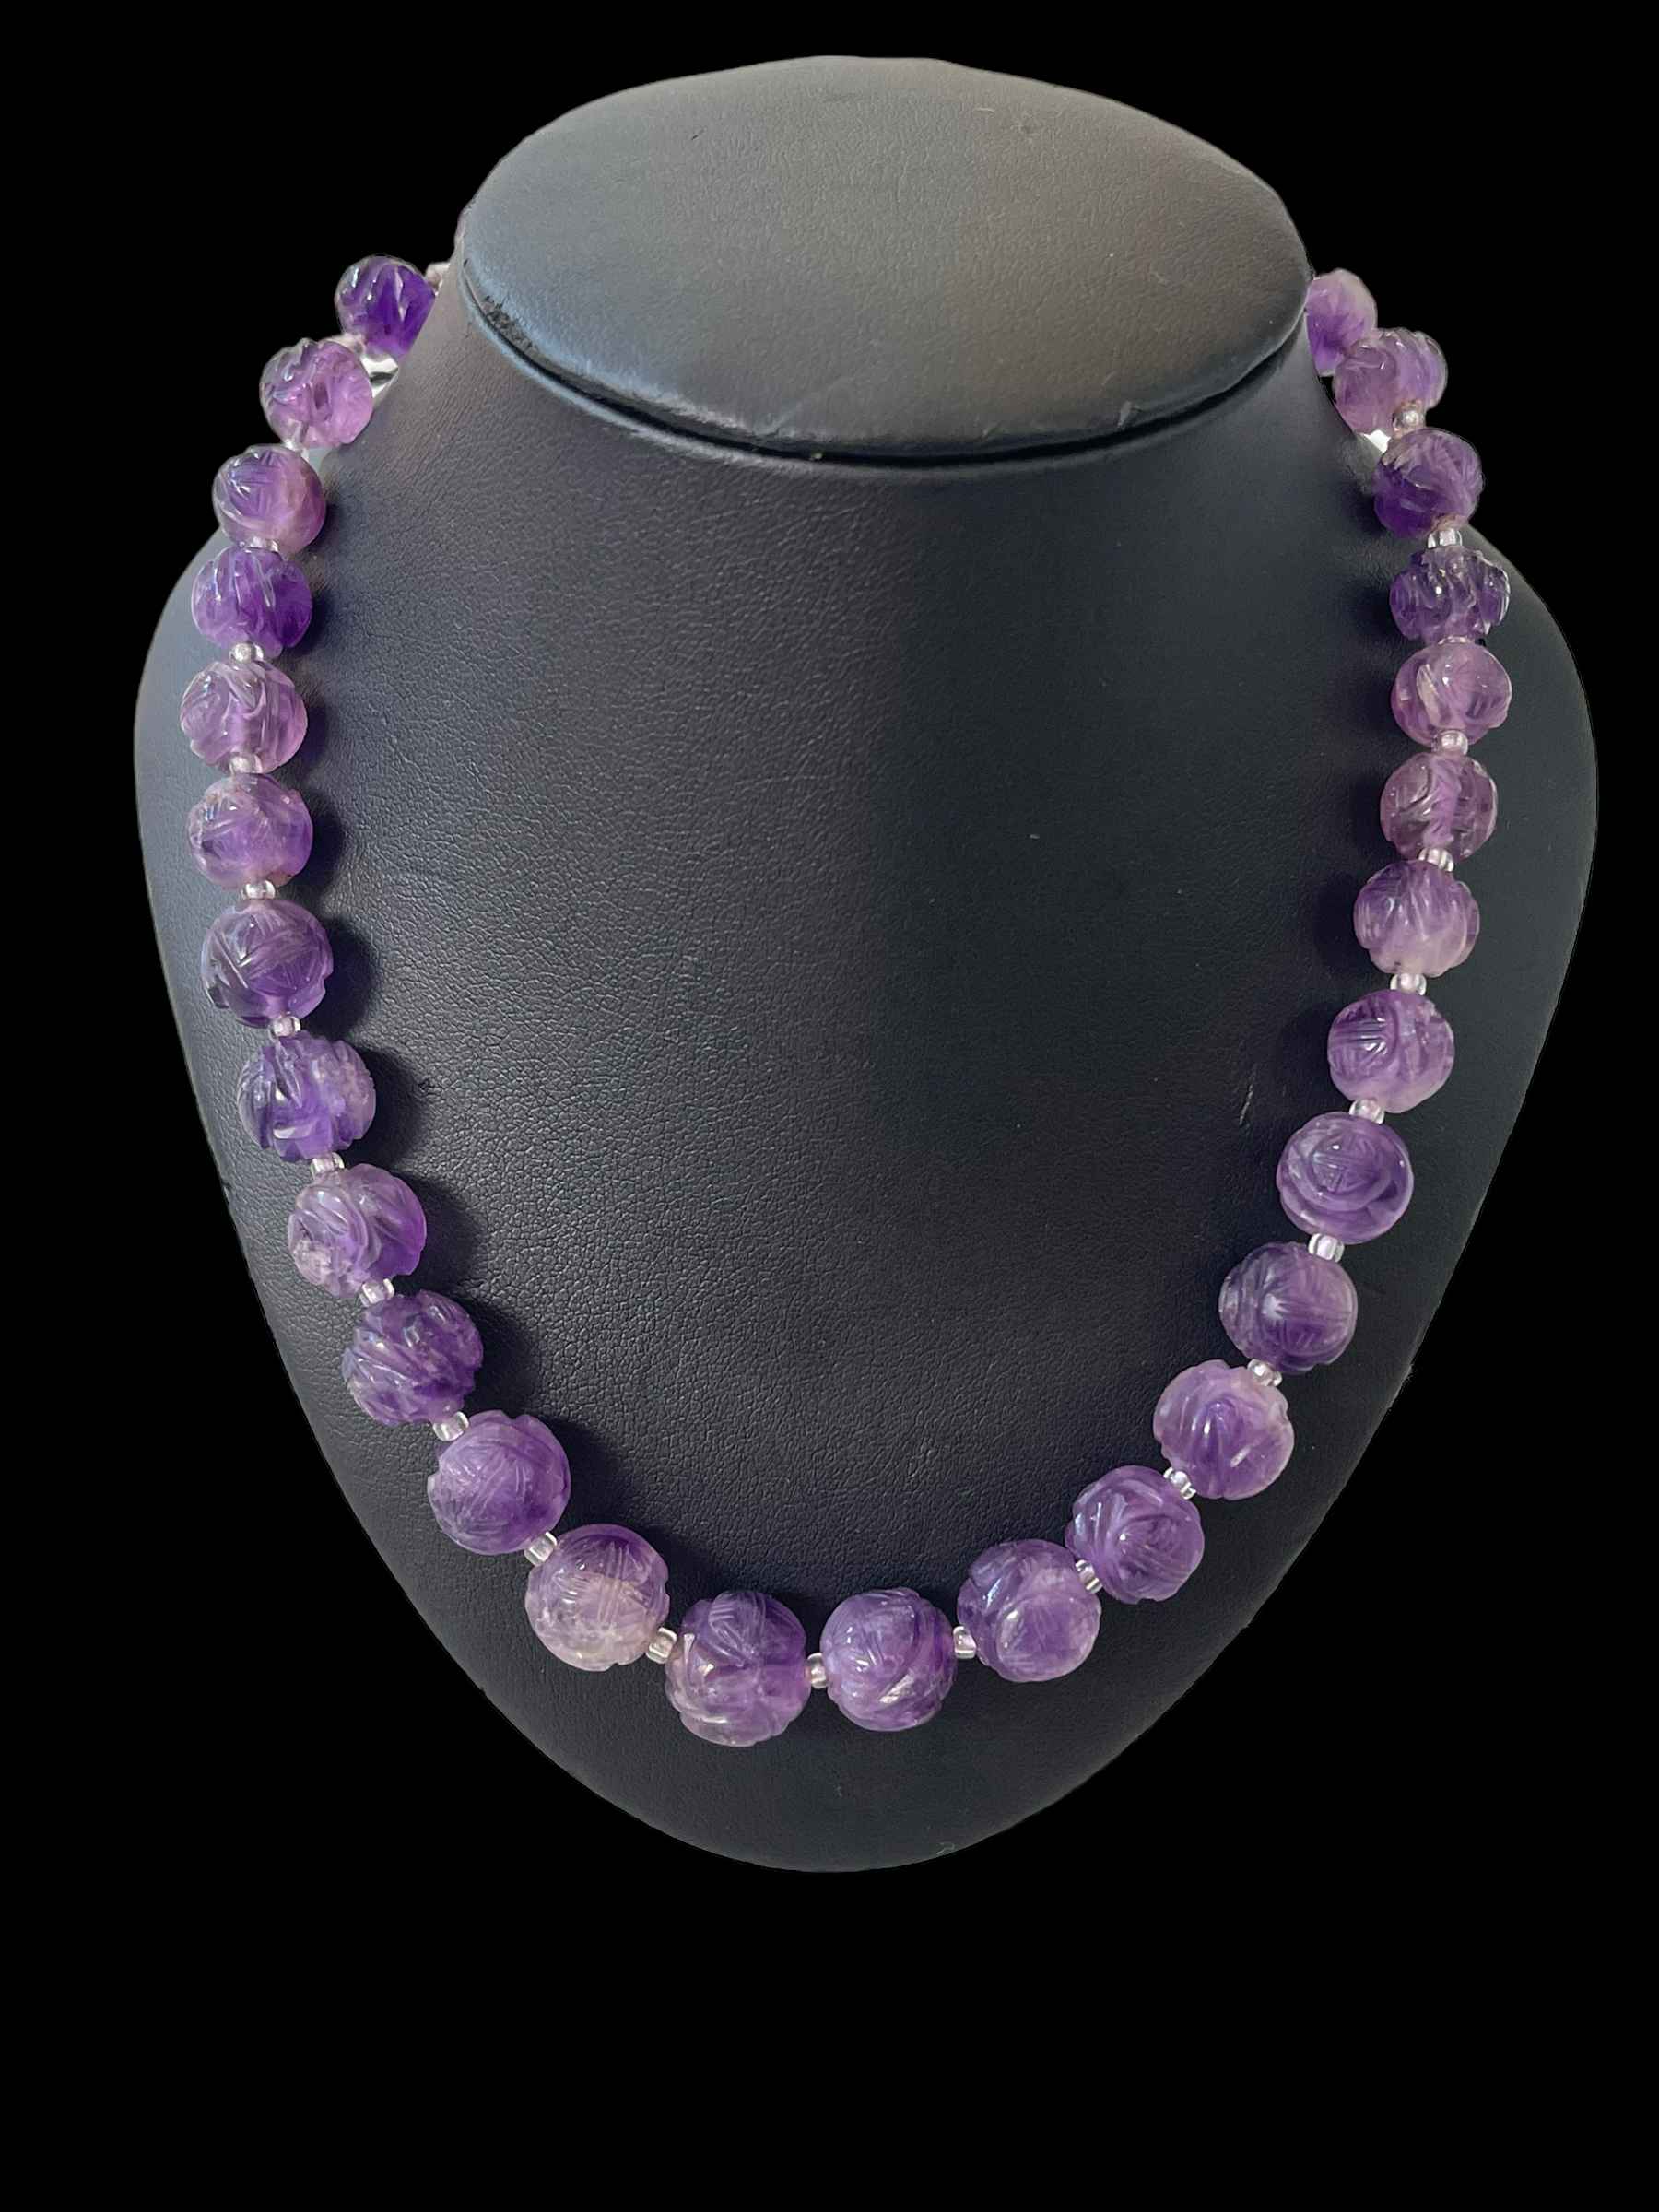 Chinese amethyst bead necklace with hallmarked clasp, 42cm length.